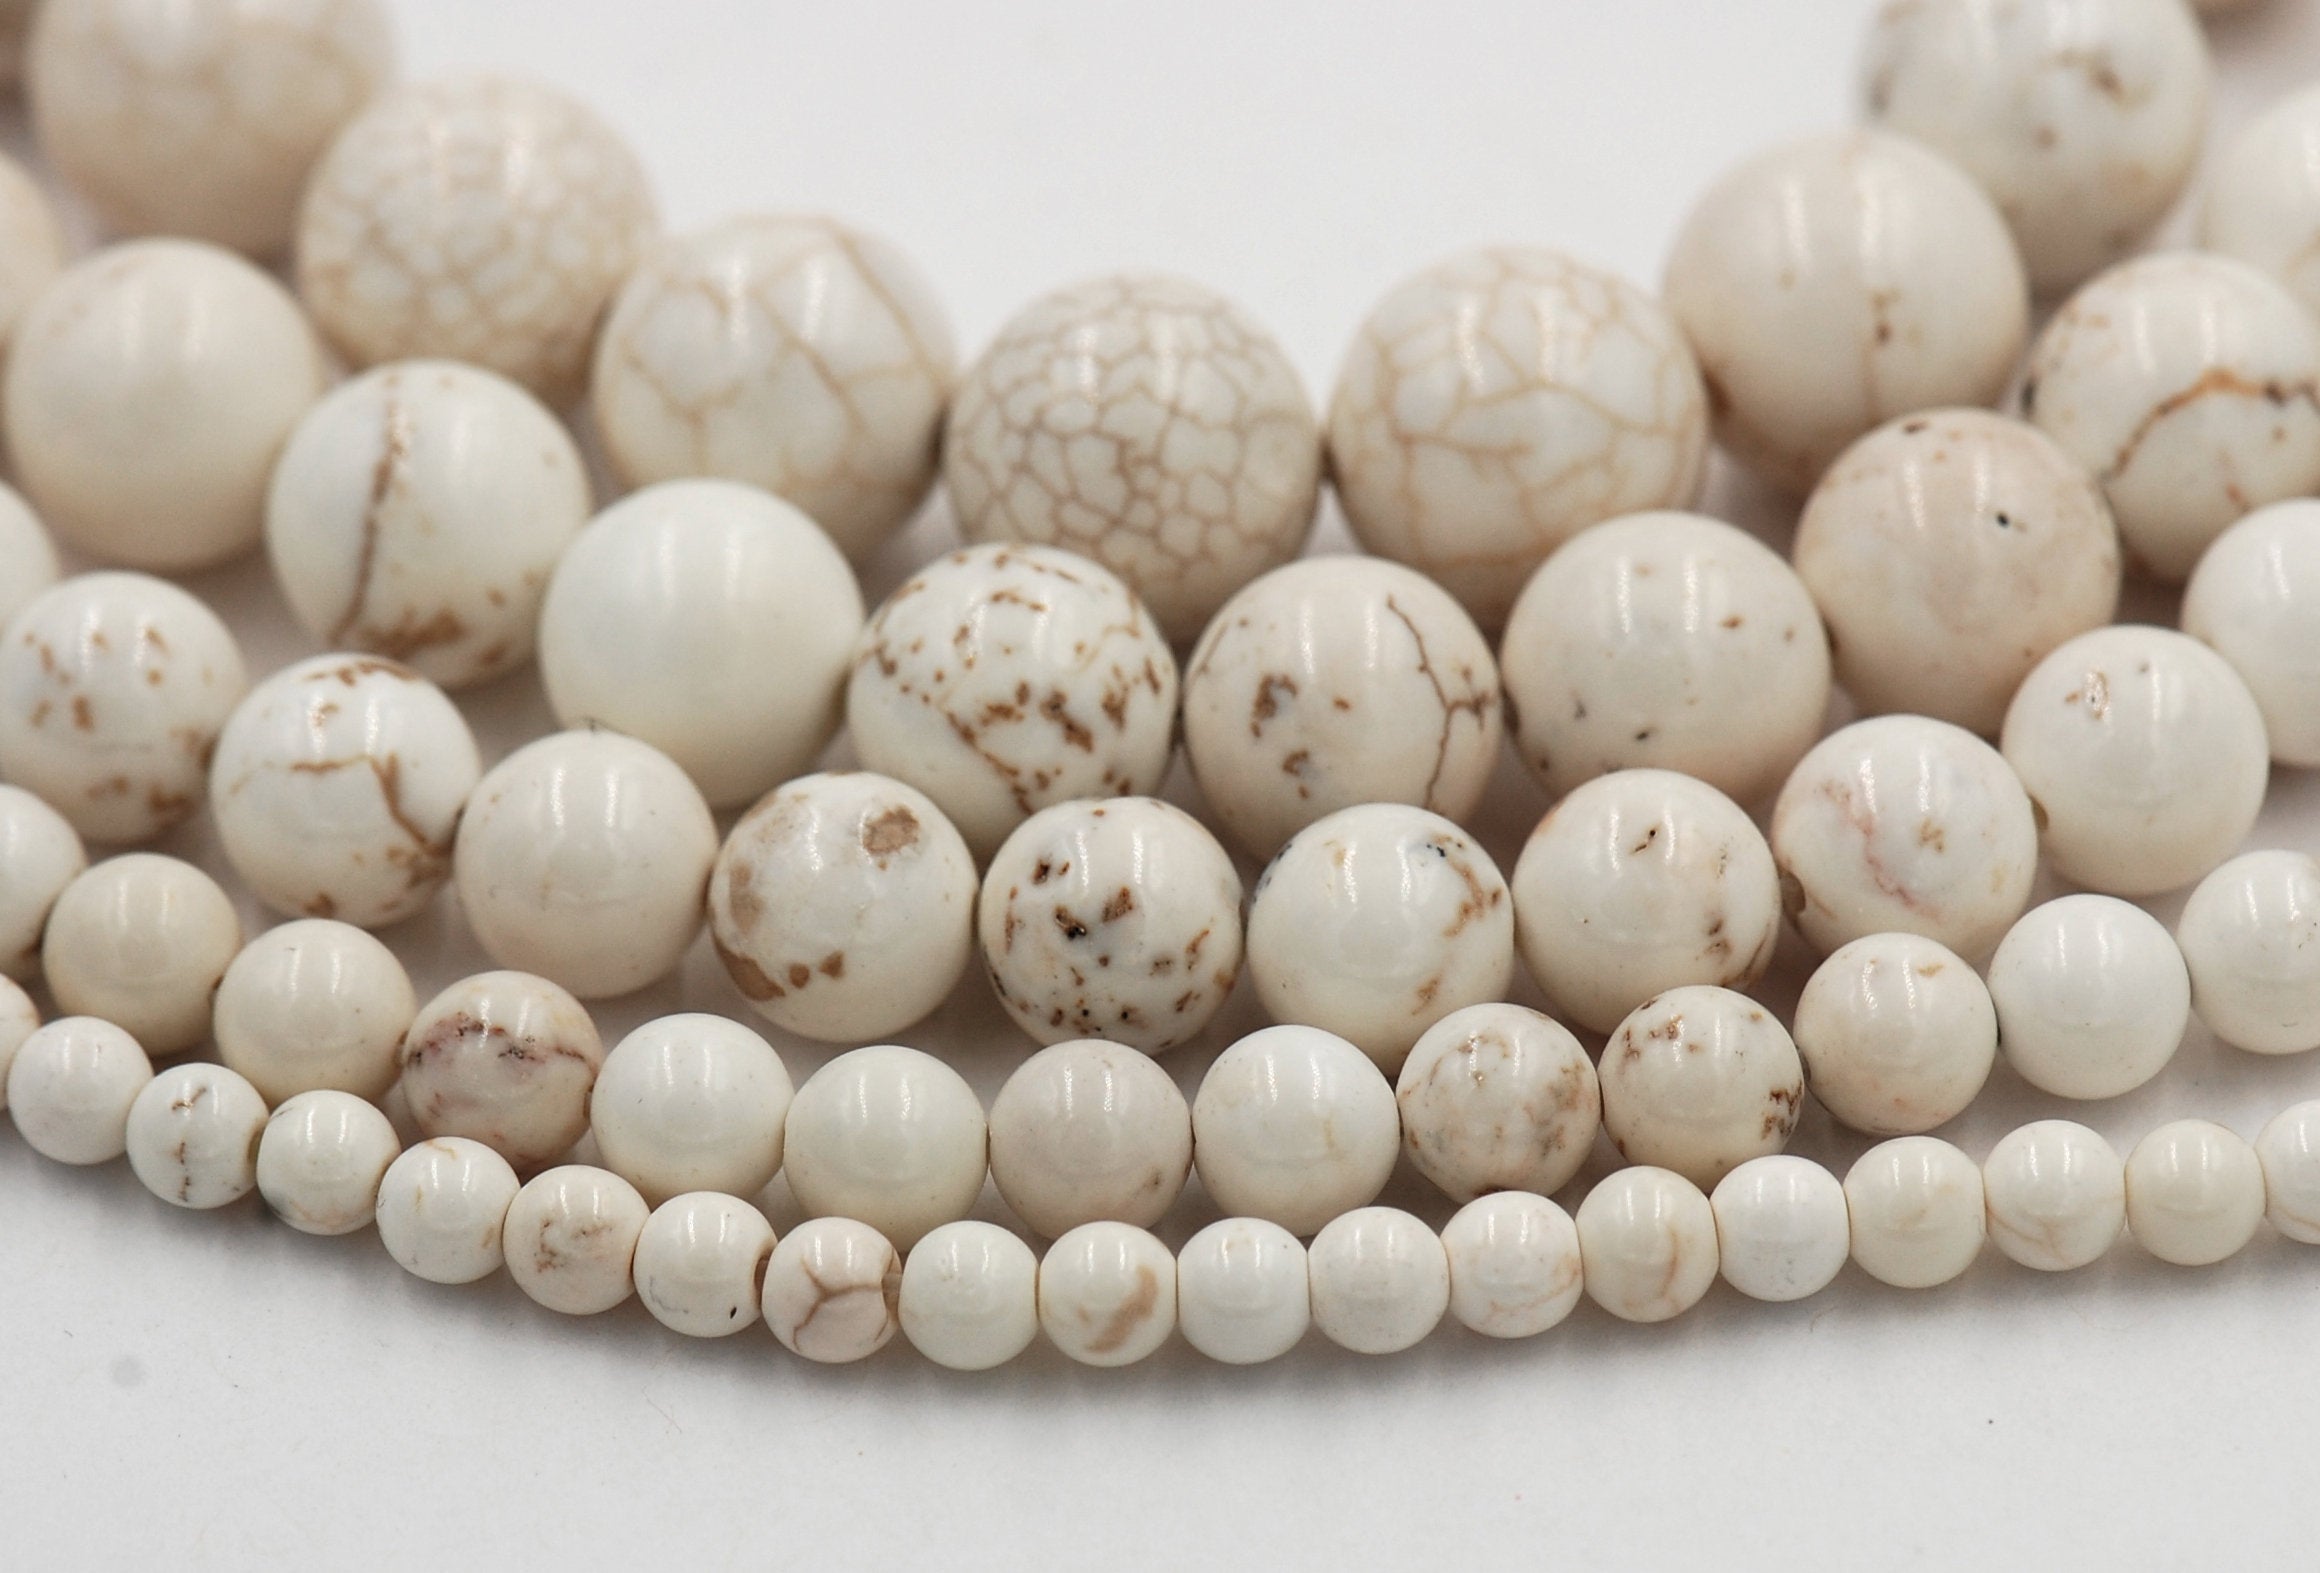 Authentic White Coral Beads, Gemstone bamboo Stone Beads, Round Natural  Beads, 15''5 Full Strand, 2mm 3mm 4mm 6mm 8mm 10mm